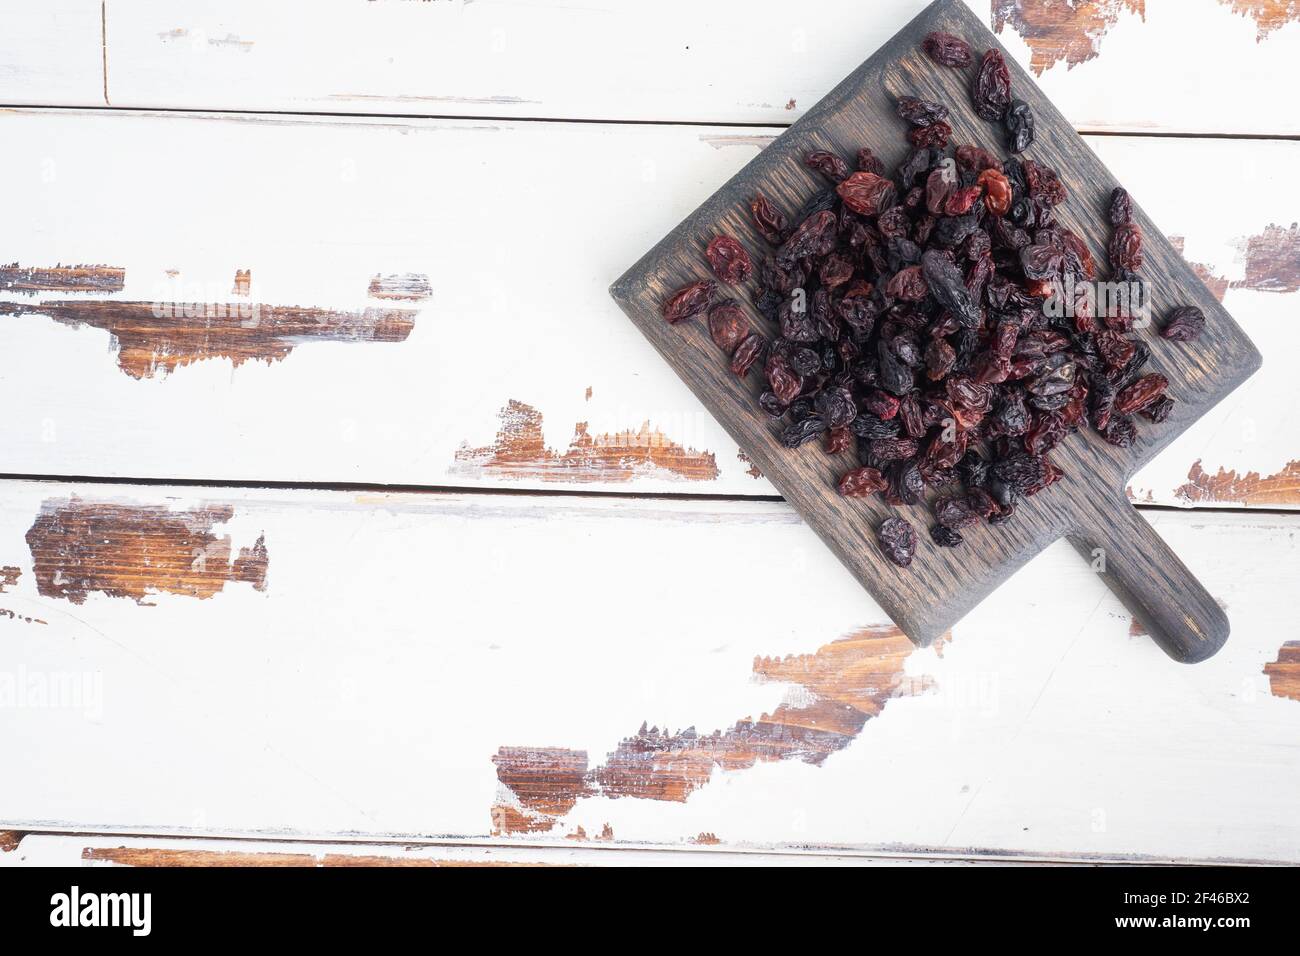 Dried raisins from dark grapes in a plate on a wooden chopping board Stock Photo